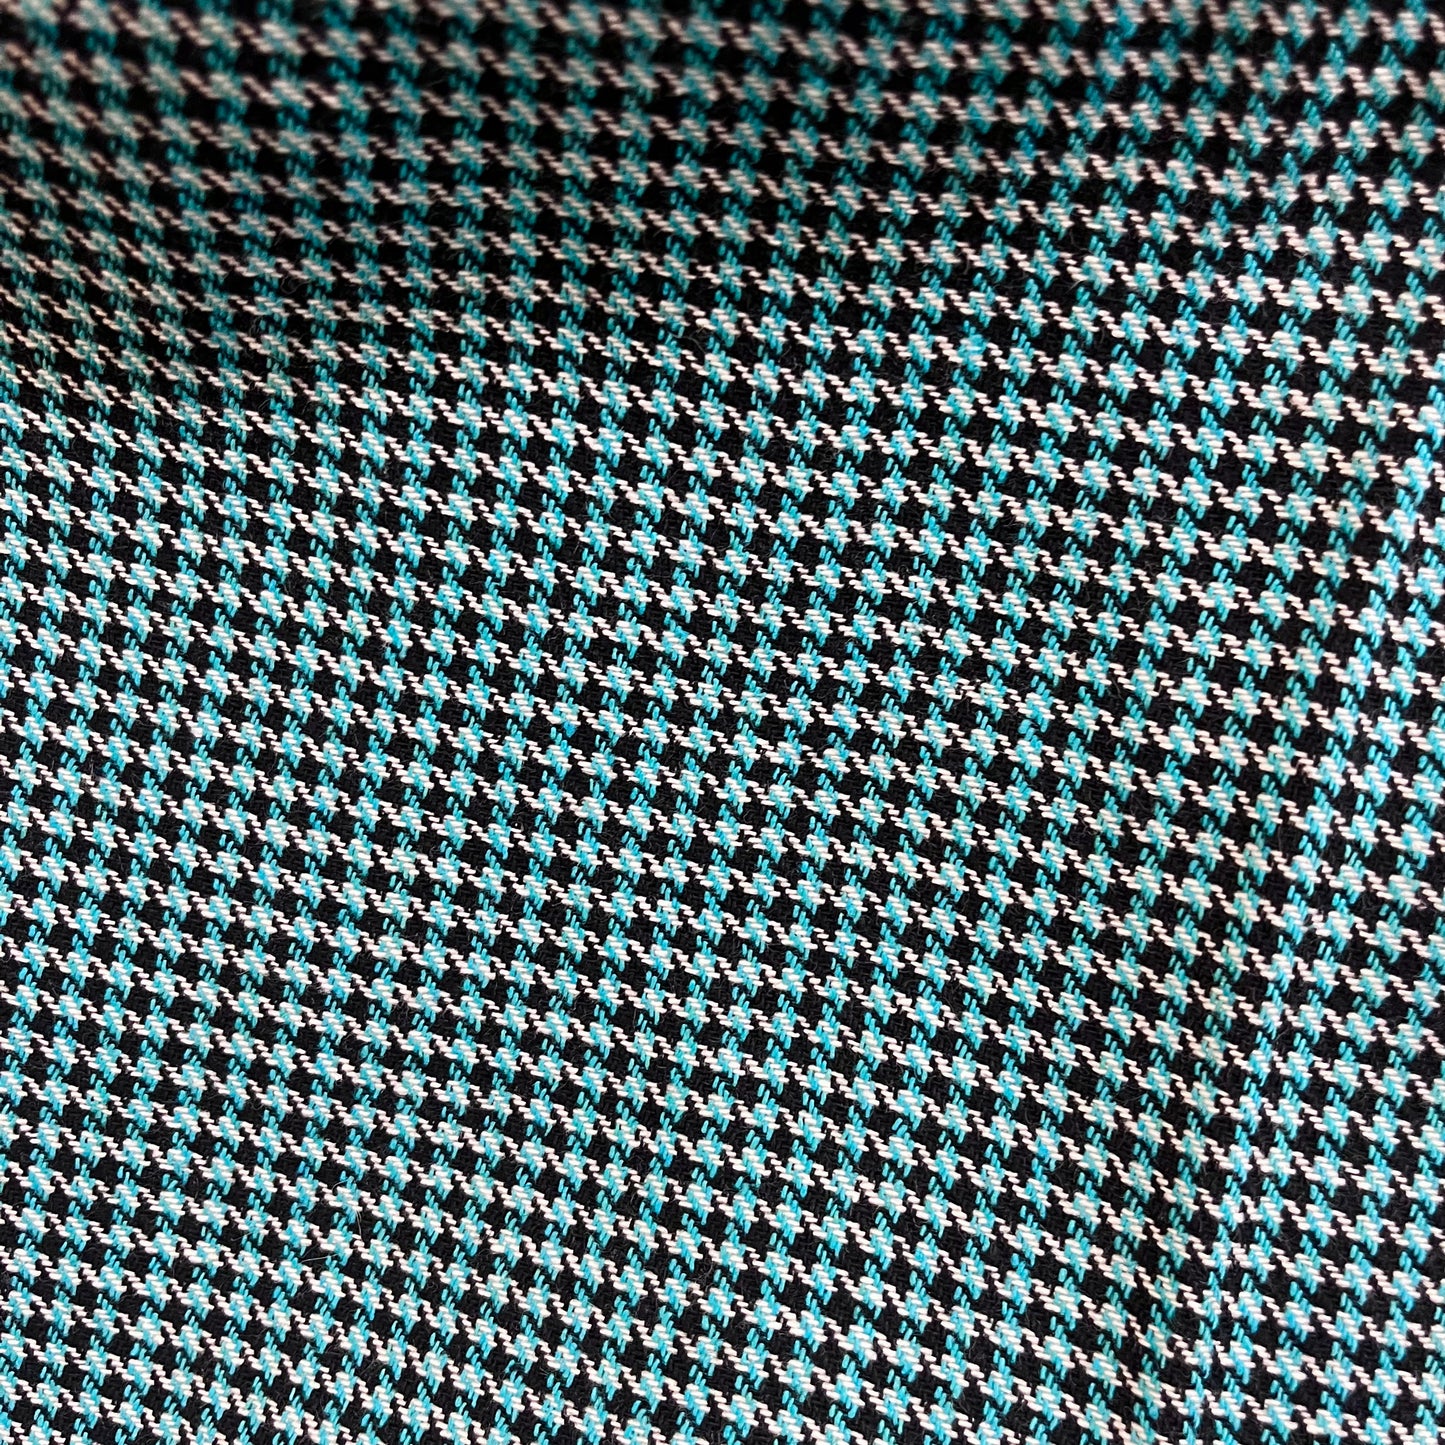 Italian Double Face Melton Wool - Turquoise Houndstooth Plaid & Heathered Gray